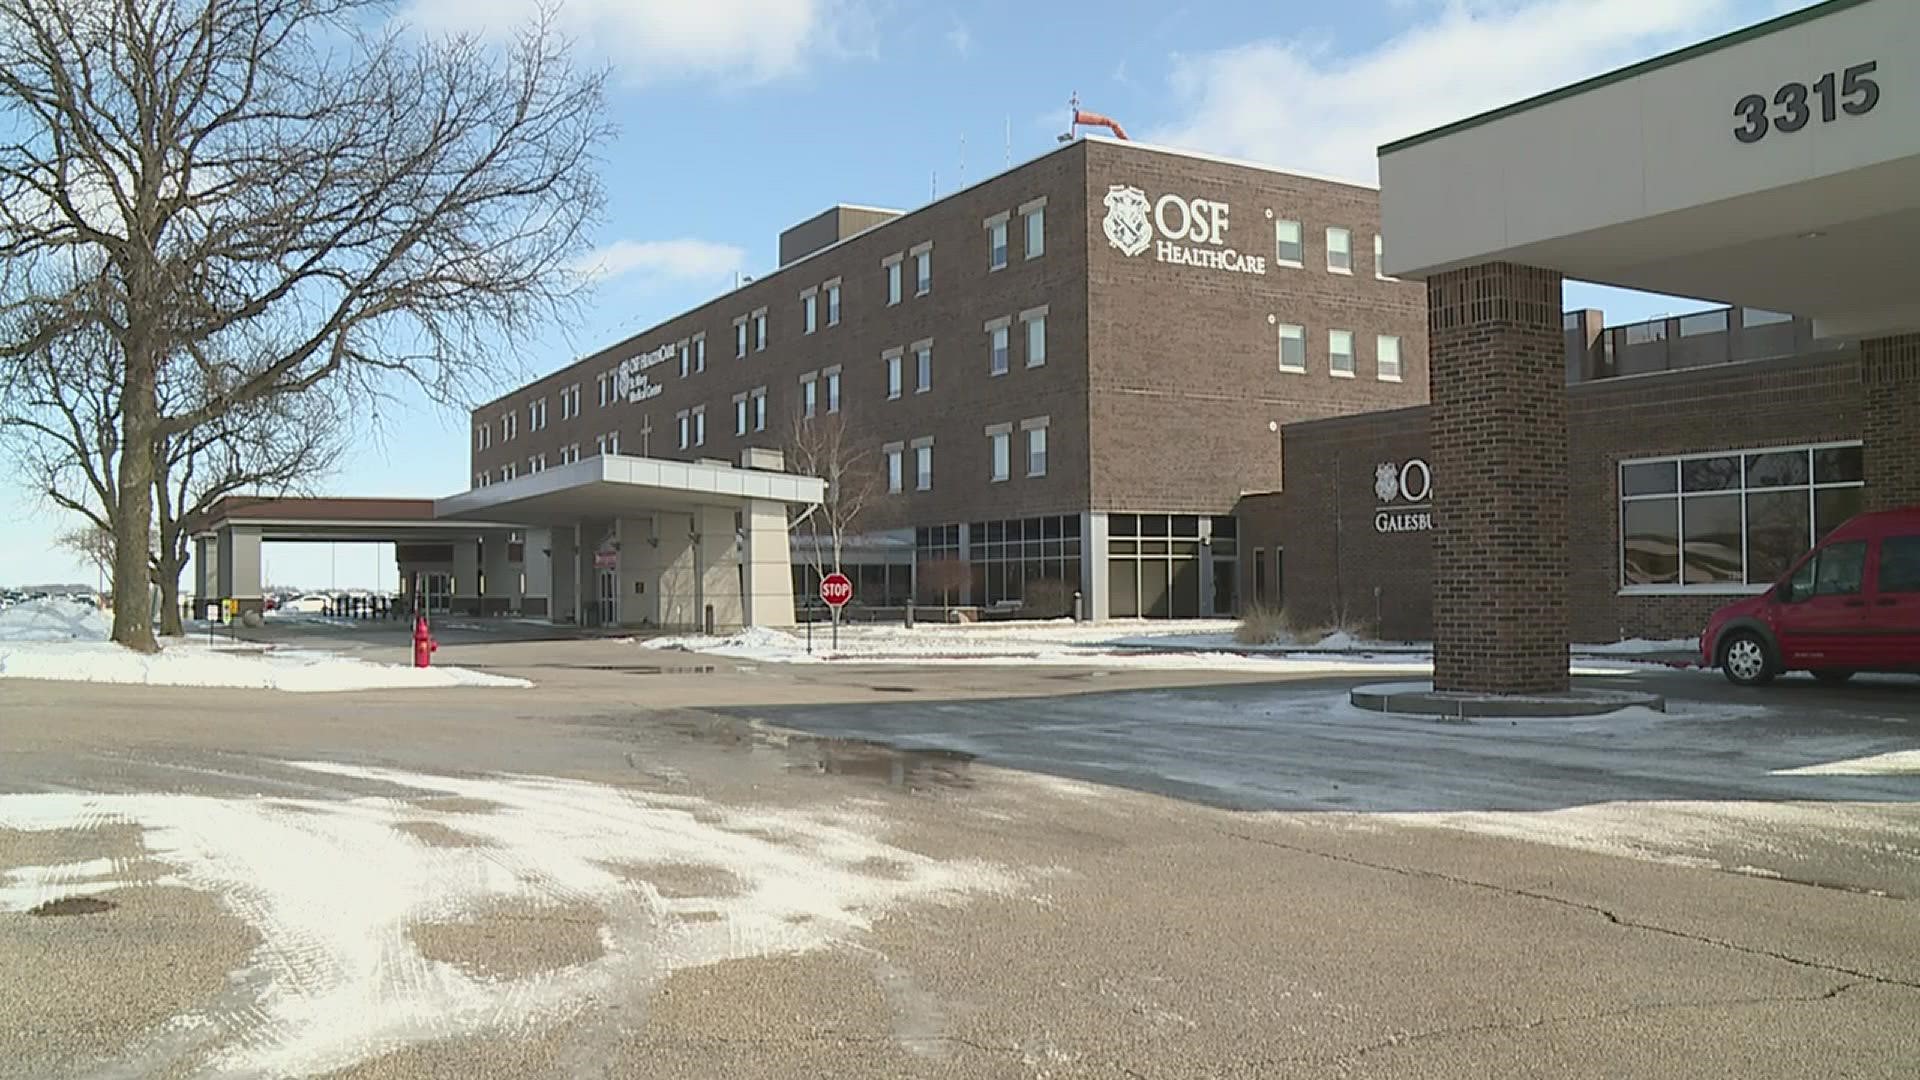 Since Cottage closed its doors on Jan. 8, St. Mary has been Galesburg's sole hospital. Now, OSF officials say the hardest parts of that transition are behind them.